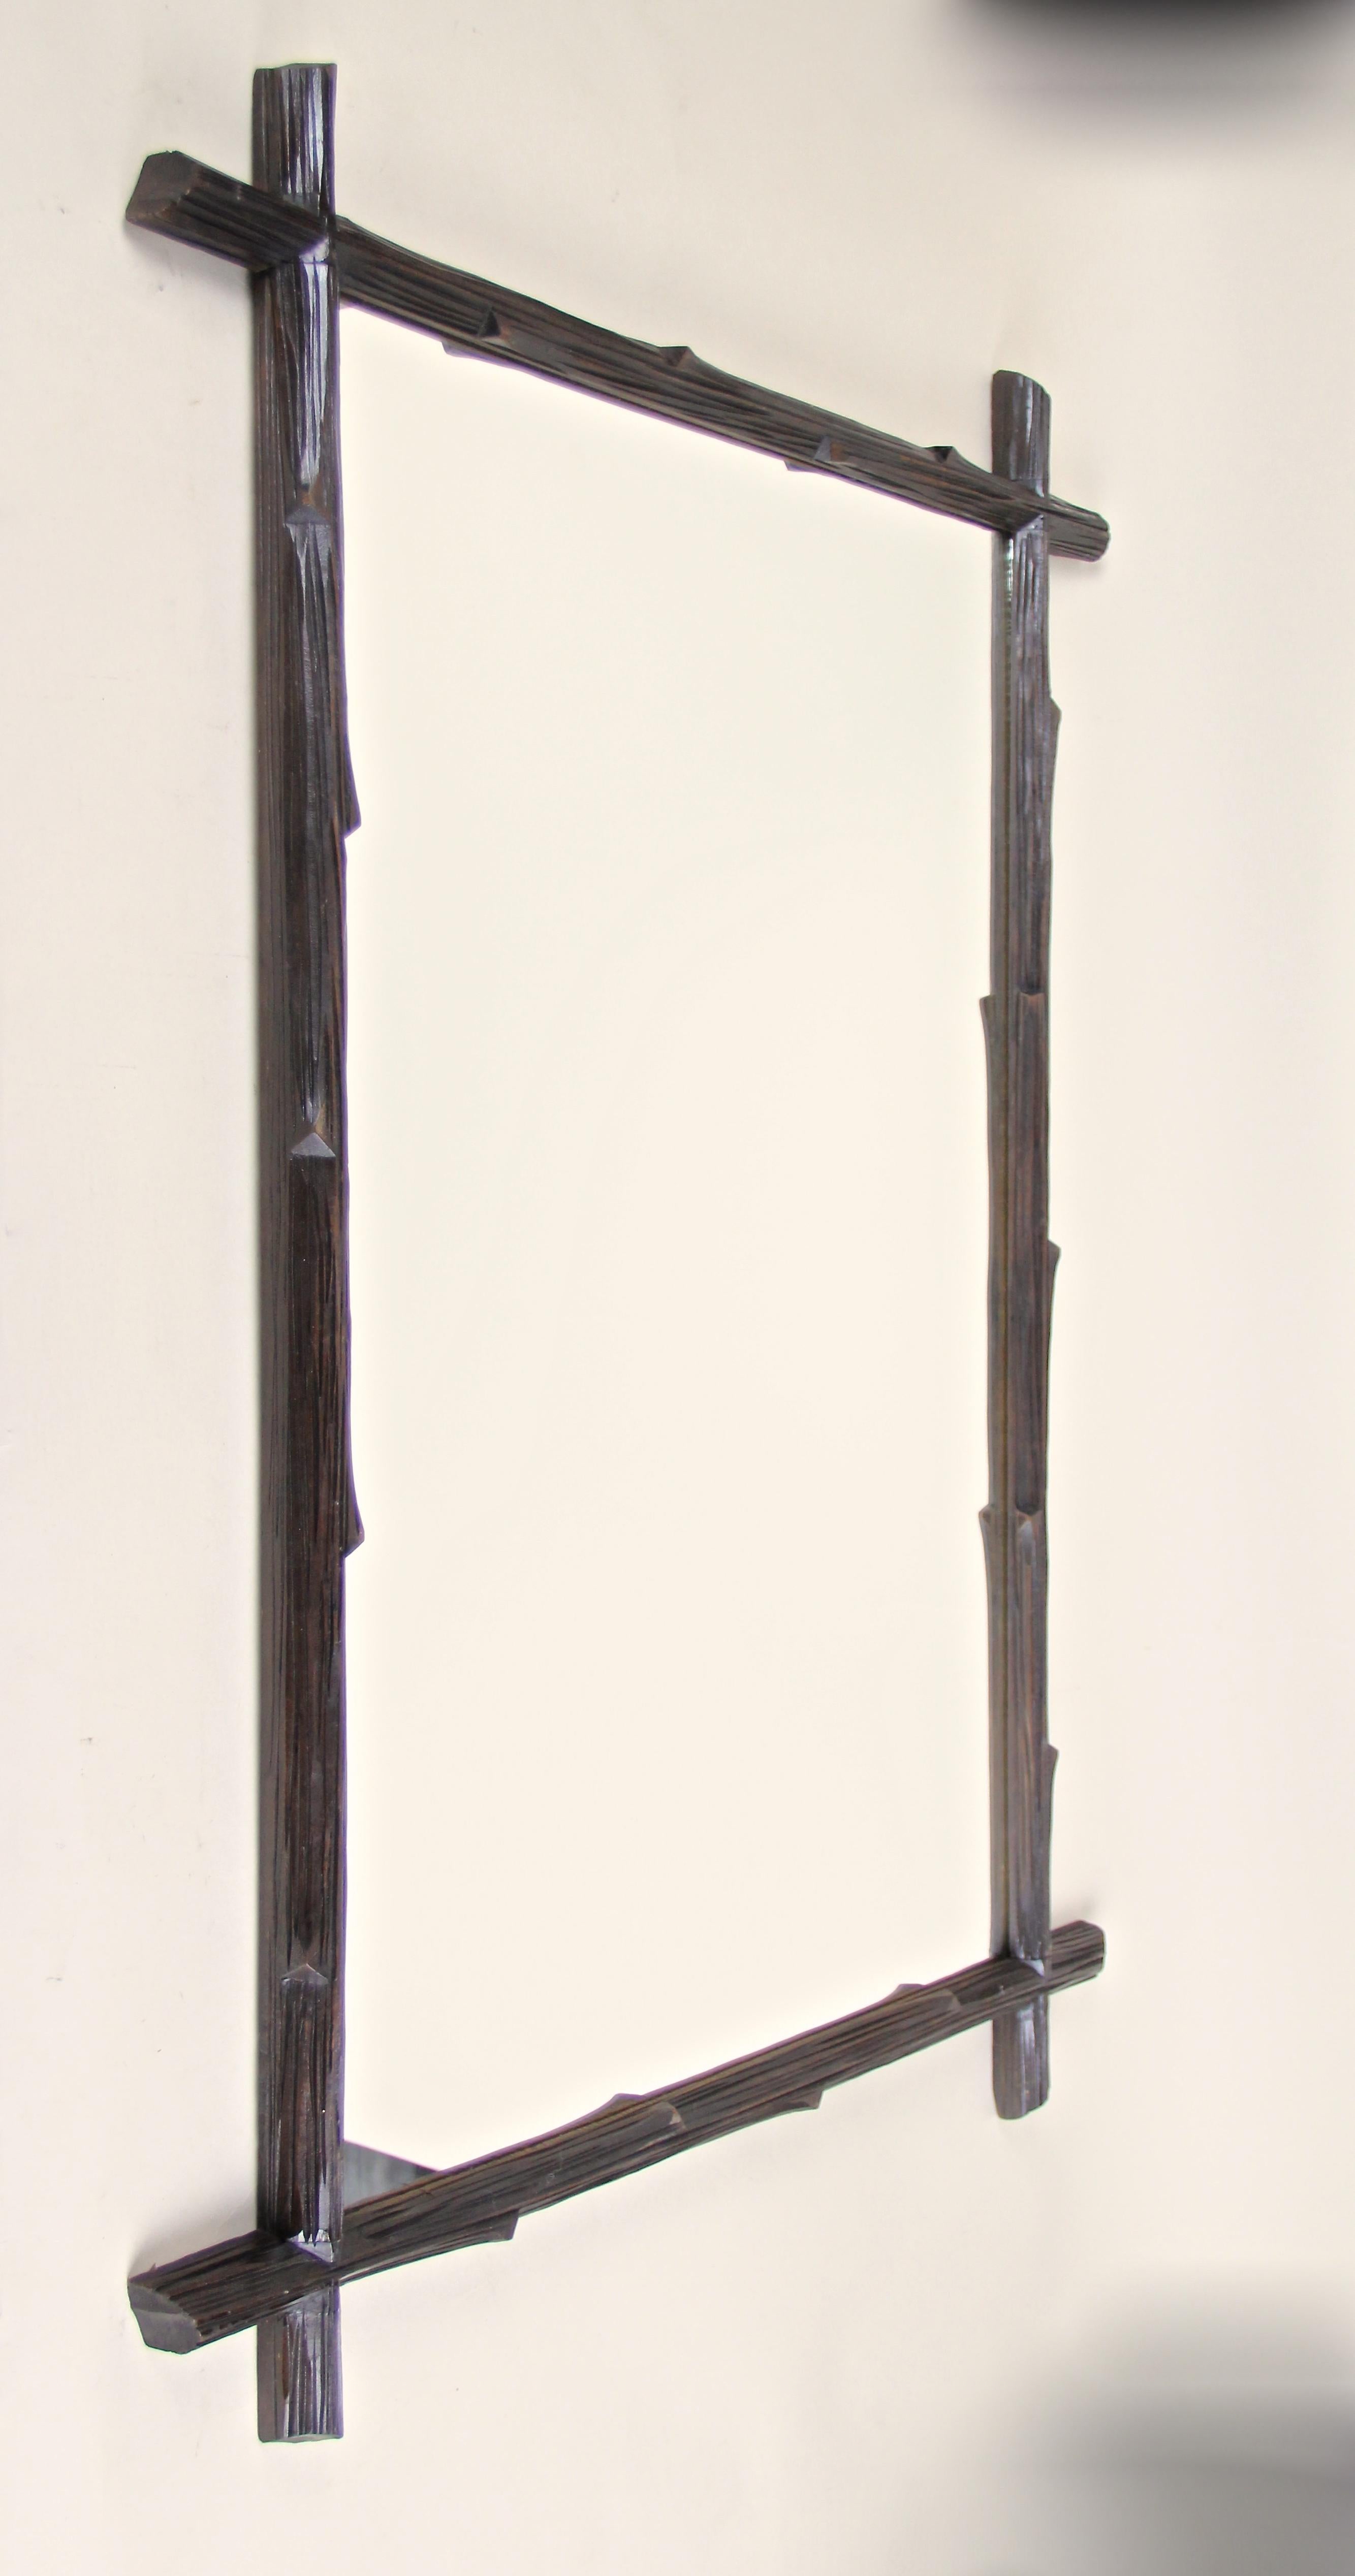 Large rustic Black Forest wall mirror from the late 19th century in Austria. The simple but beautiful design processed circa 1880 brings a unique rural charme to your home. This hand carved Black Forest mirror shows a fantastic 